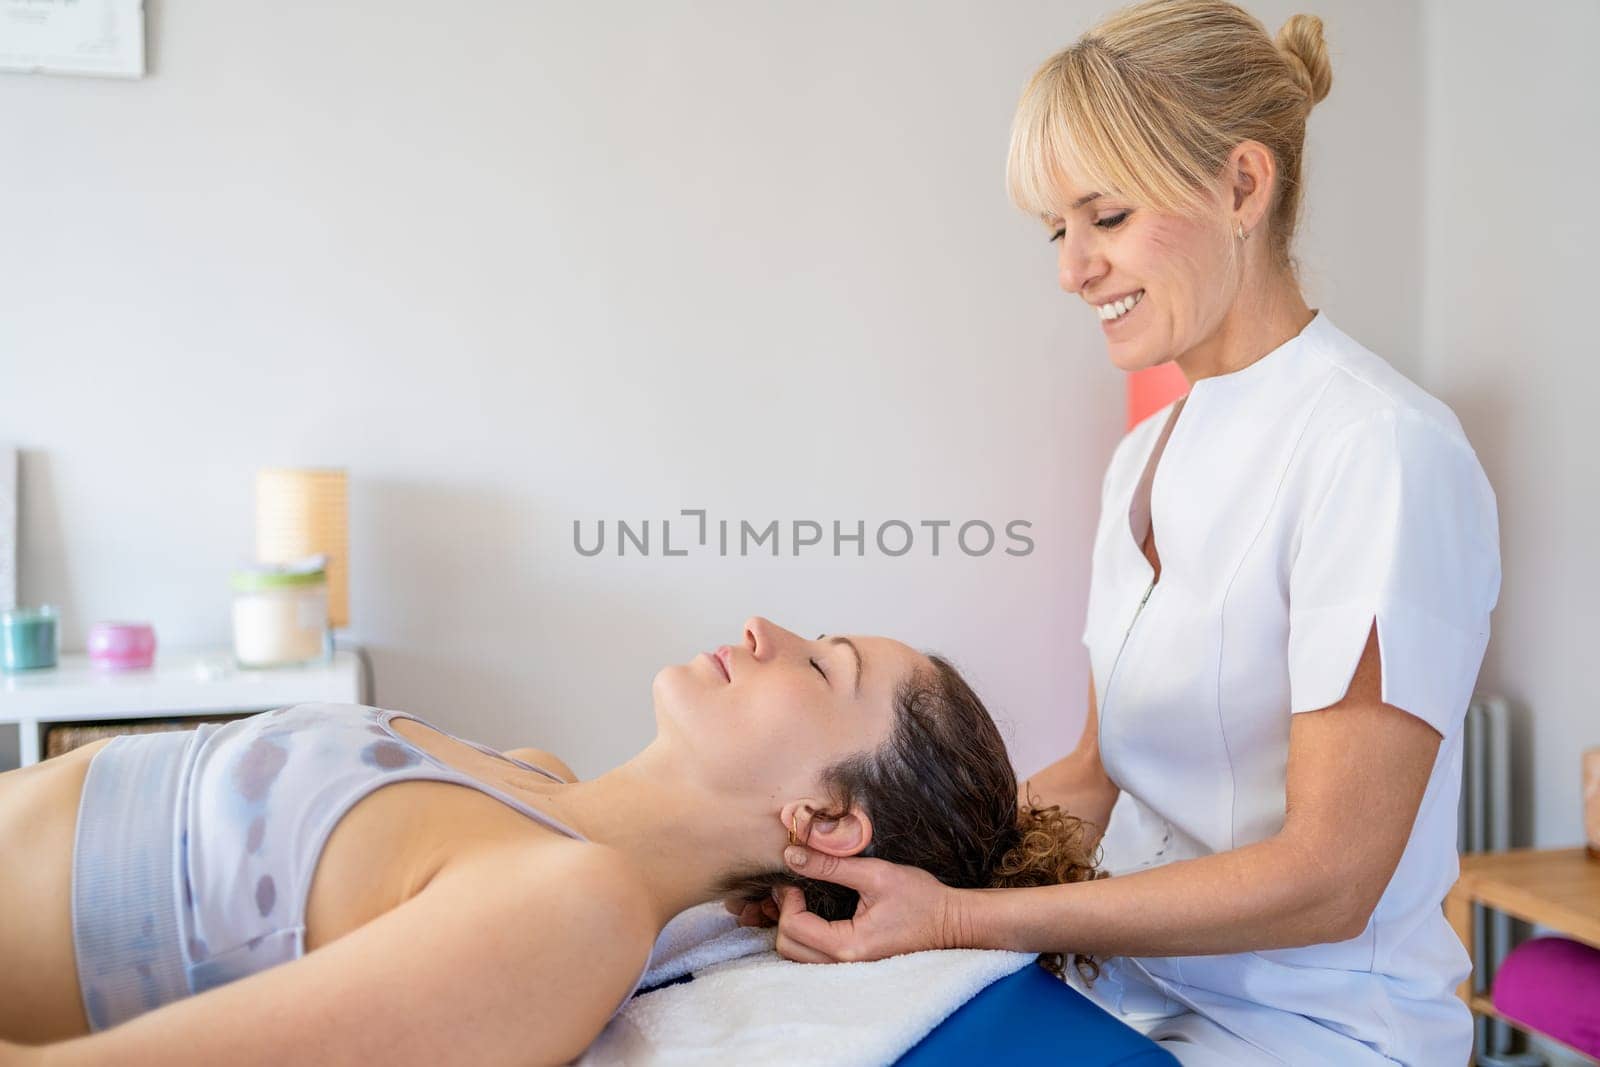 Side view of smiling female blond hair physiotherapist rubbing neck of client lying face up in bed and closing eyes during massage treatment